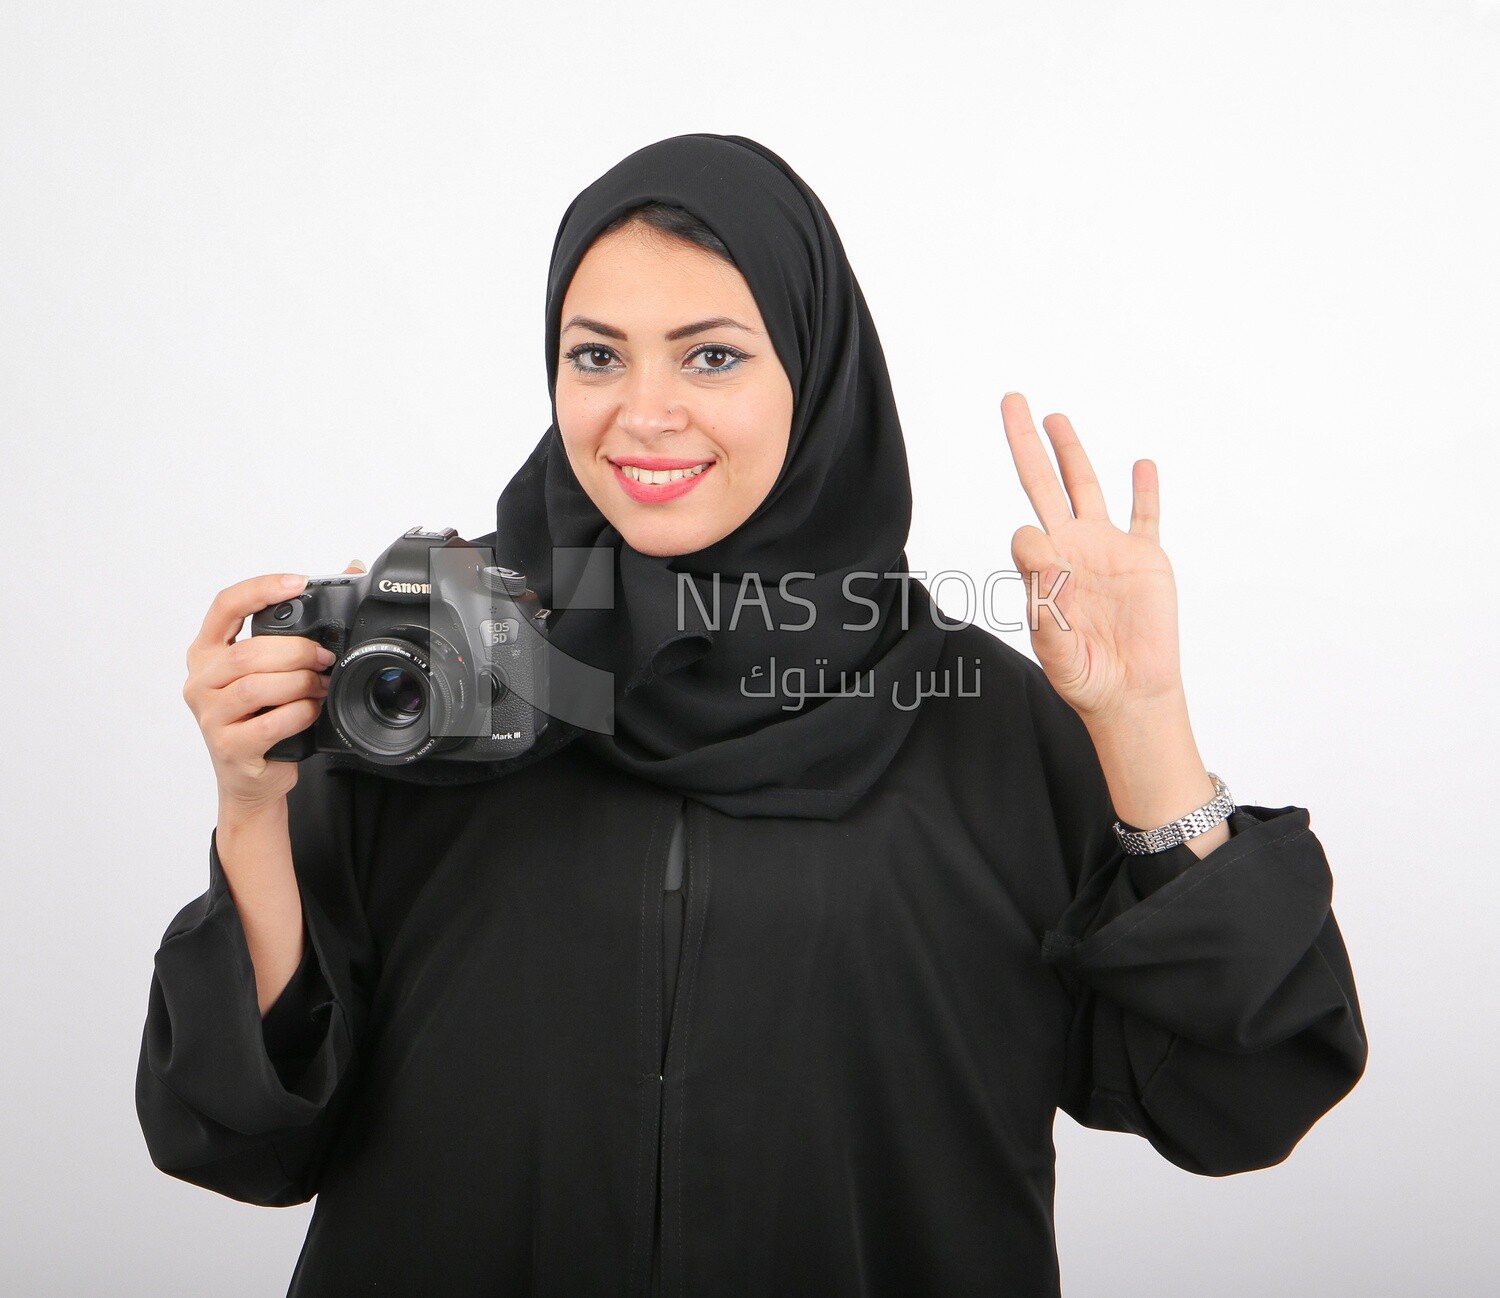 A woman with a hijab holding a camera